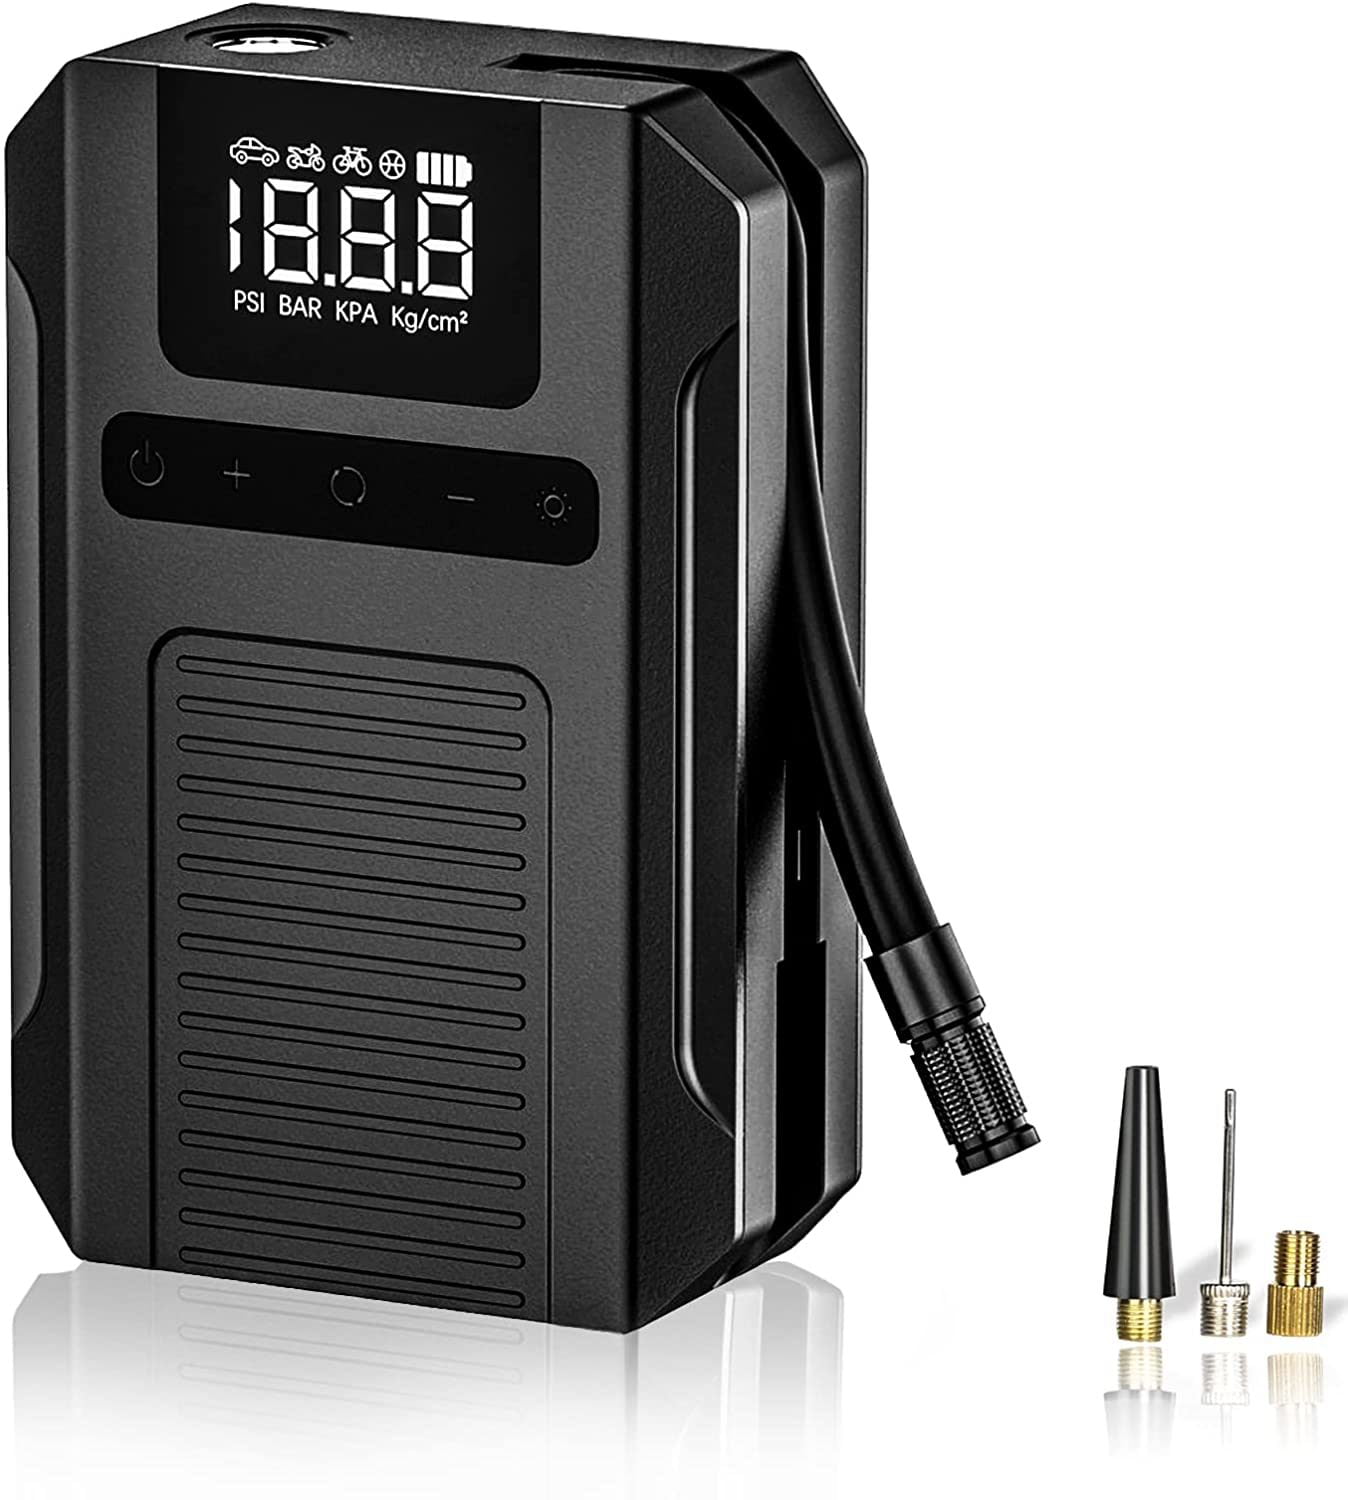 Tire Inflator Portable Air Compressor Mini Tire Pump with 5000mAH Battery and Digital Display for Car、Bike、Motorbikes、Ball Black Heat Dissipation Electric Air Pump 150PSI with Pressure Gauge 